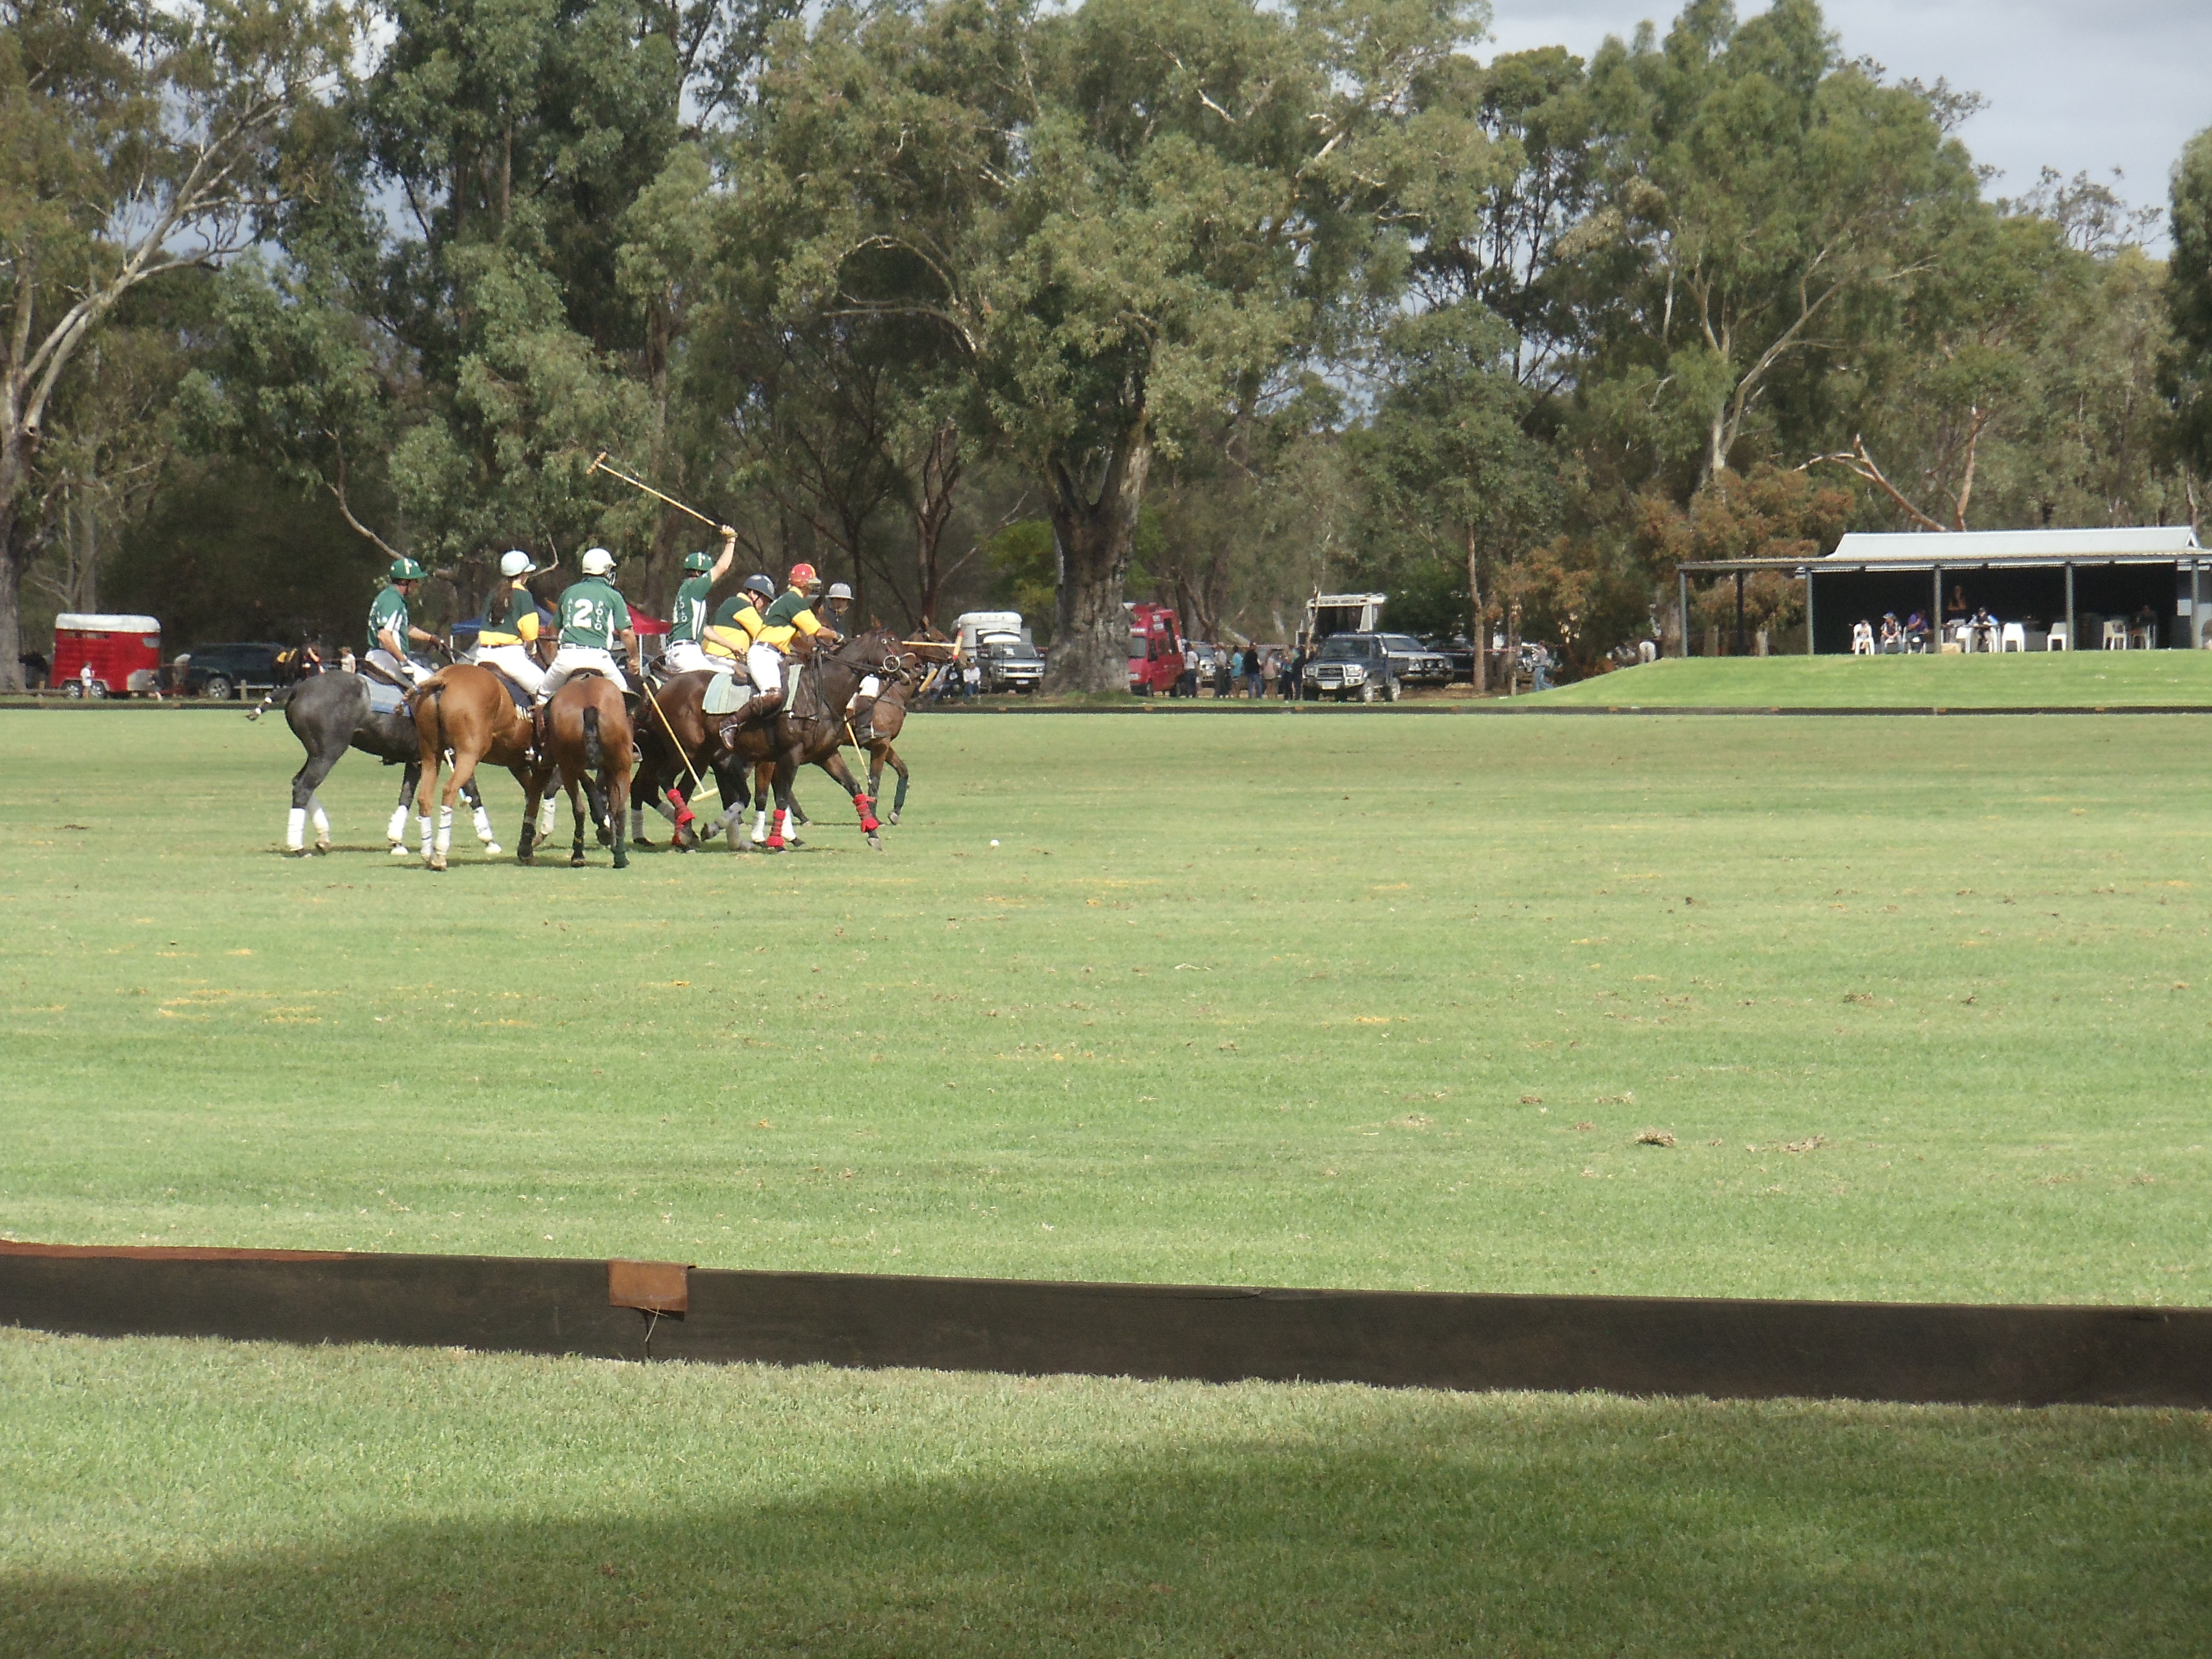 Suburban Focus – The History of the Perth Polo Club